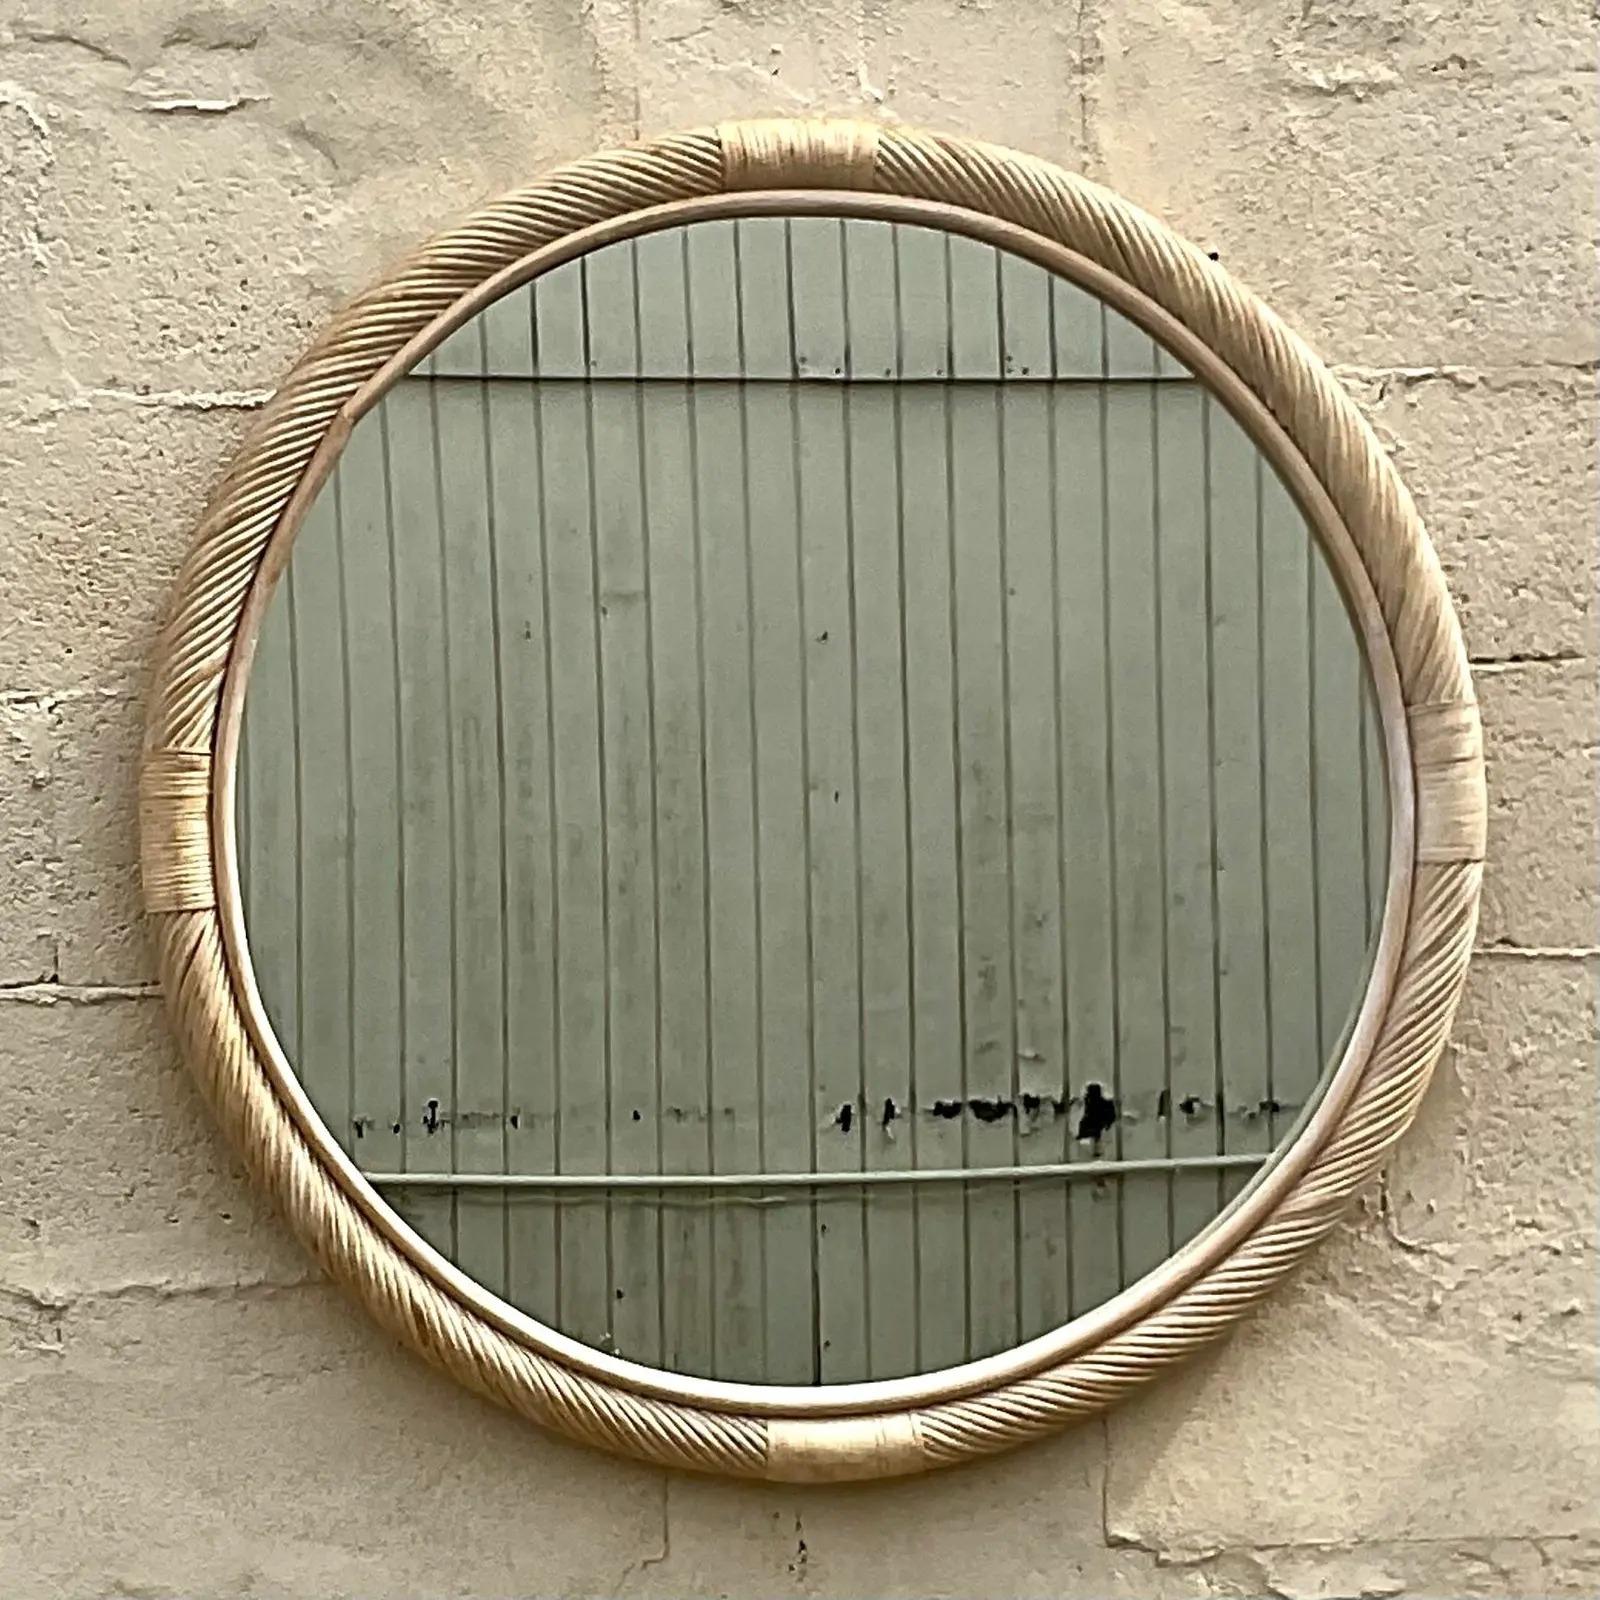 A fabulous vintage Coastal wall mirror. A chic cerused rattan in clean twist design. Acquired from a Palm Beach estate.